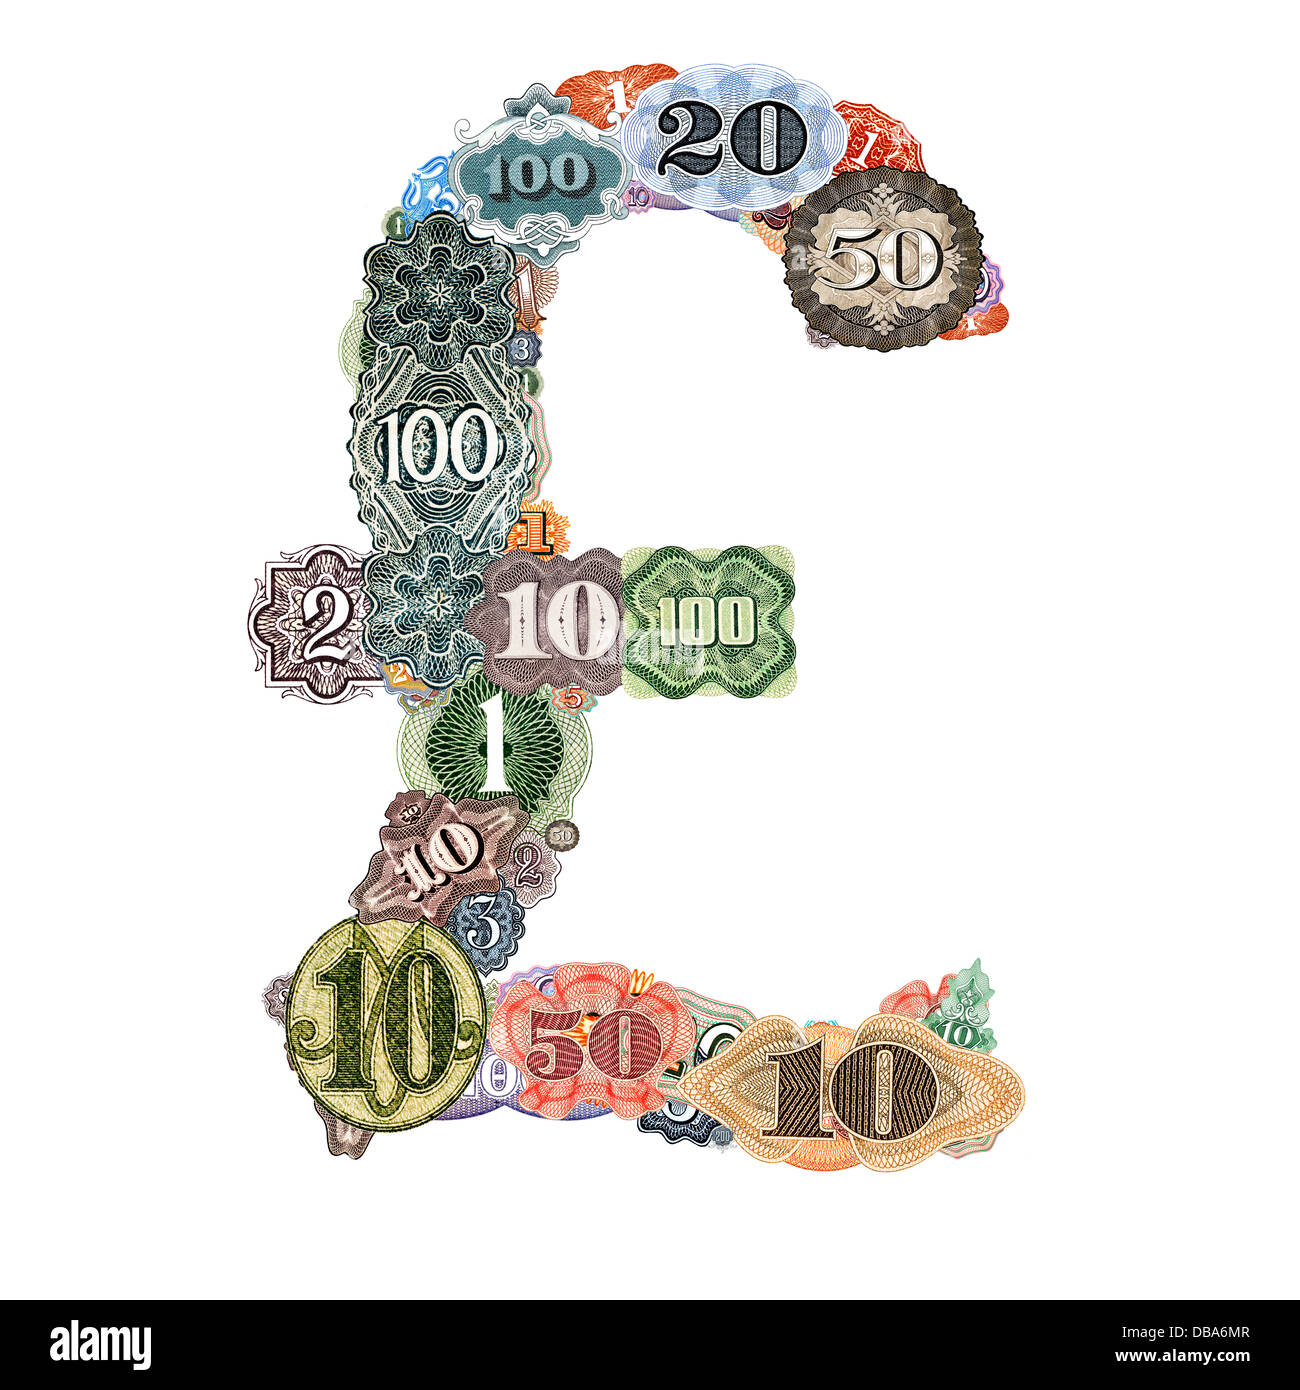 British pound sign made from numbers taken from world banknotes. Stock Photo